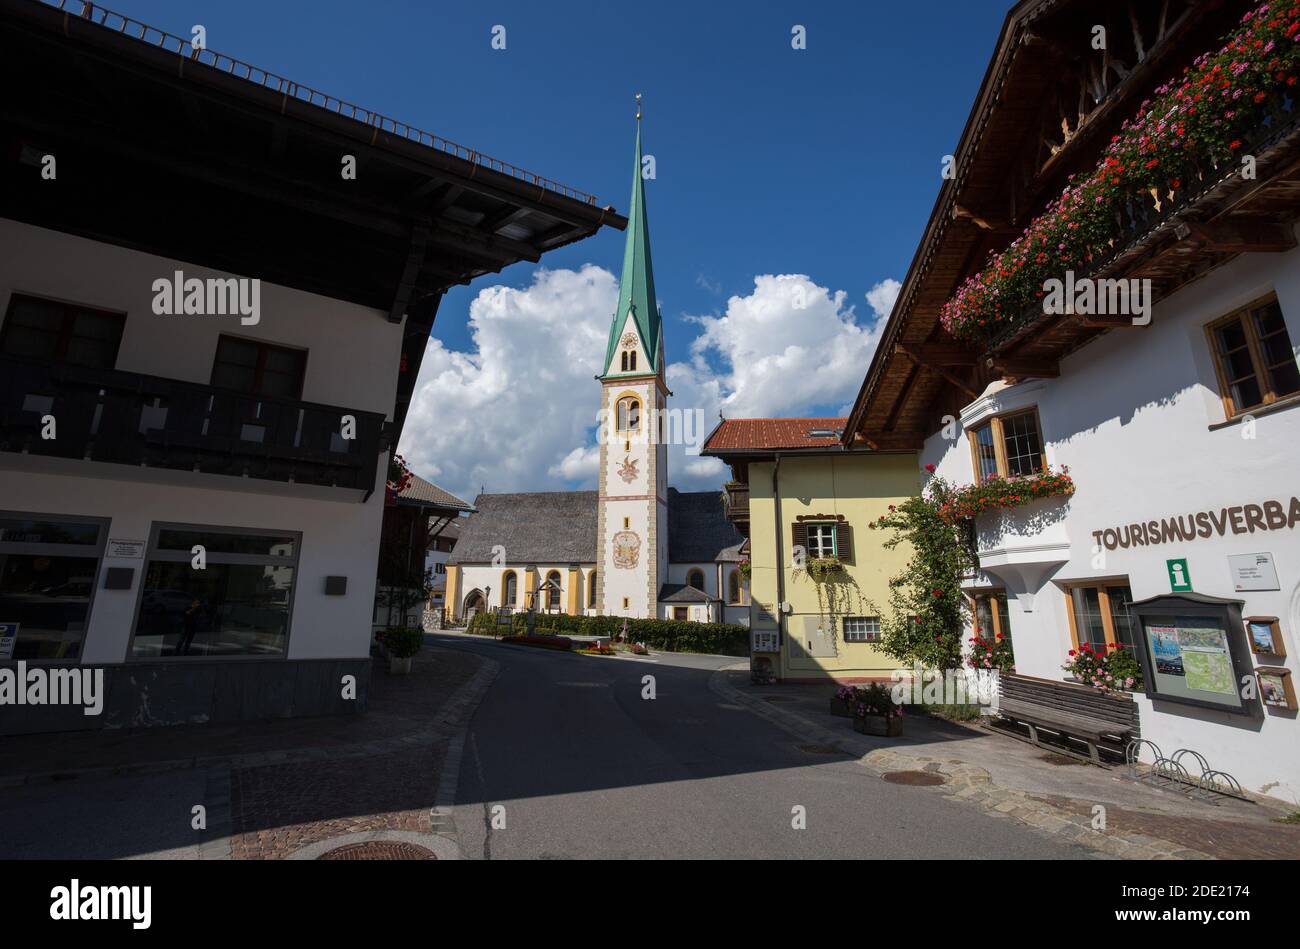 MUTTERS, AUSTRIA, SEPTEMBER 12, 2020 - View of the town of Mutters, Tyrol, Austria Stock Photo